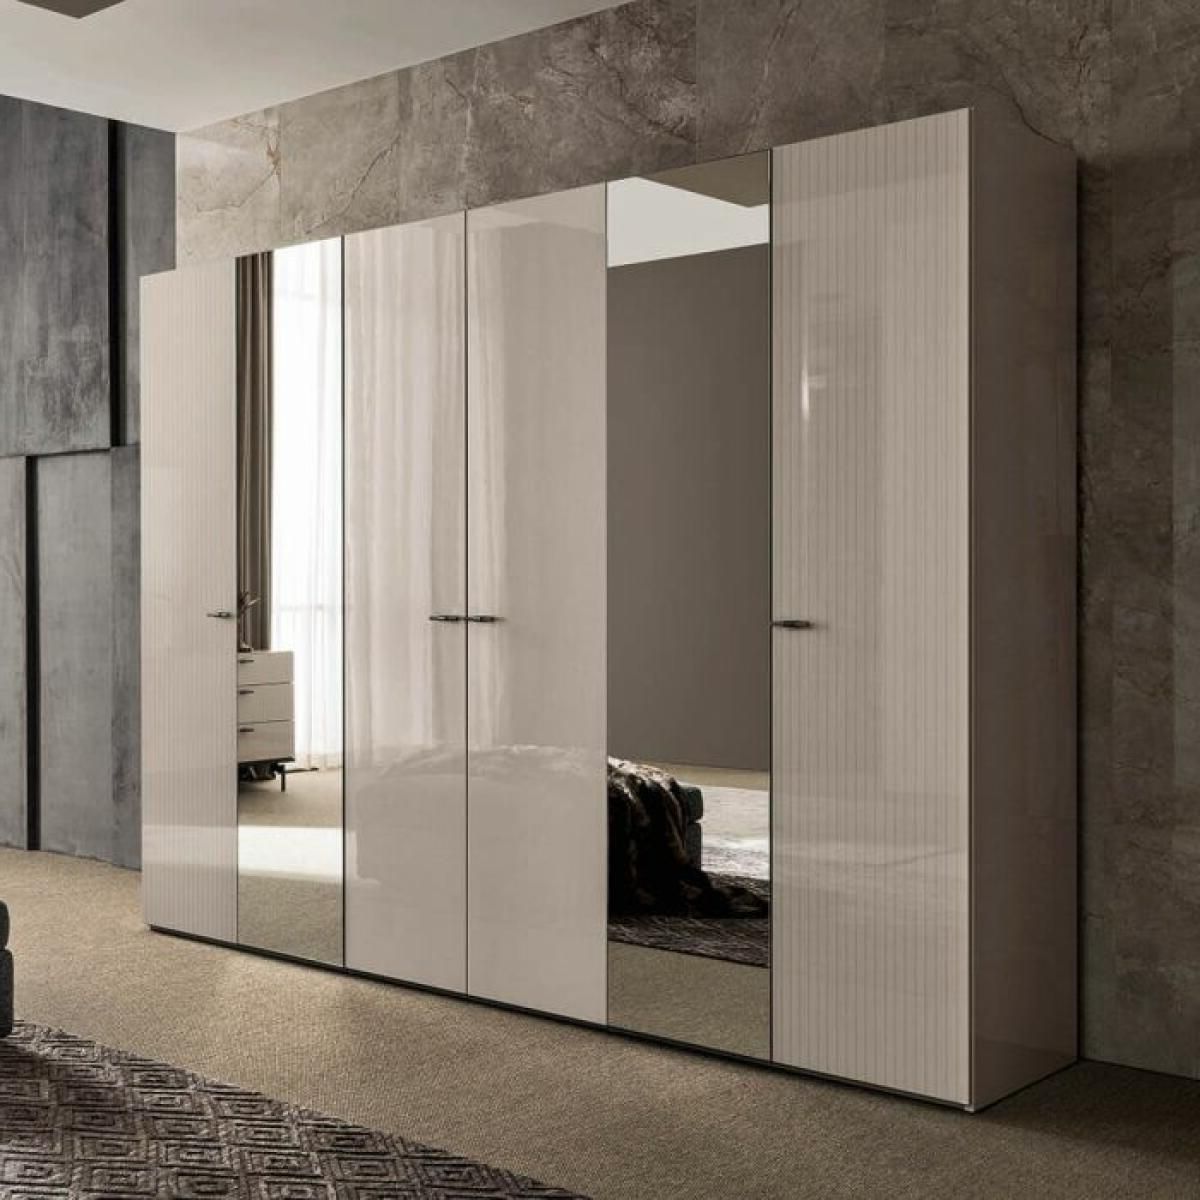 Claire 6 Door Mirrored Wardrobe – Bova Contemporary Furniture – Dallas,  Texas Modern Furniture Store Throughout 6 Door Wardrobes Bedroom Furniture (View 2 of 20)